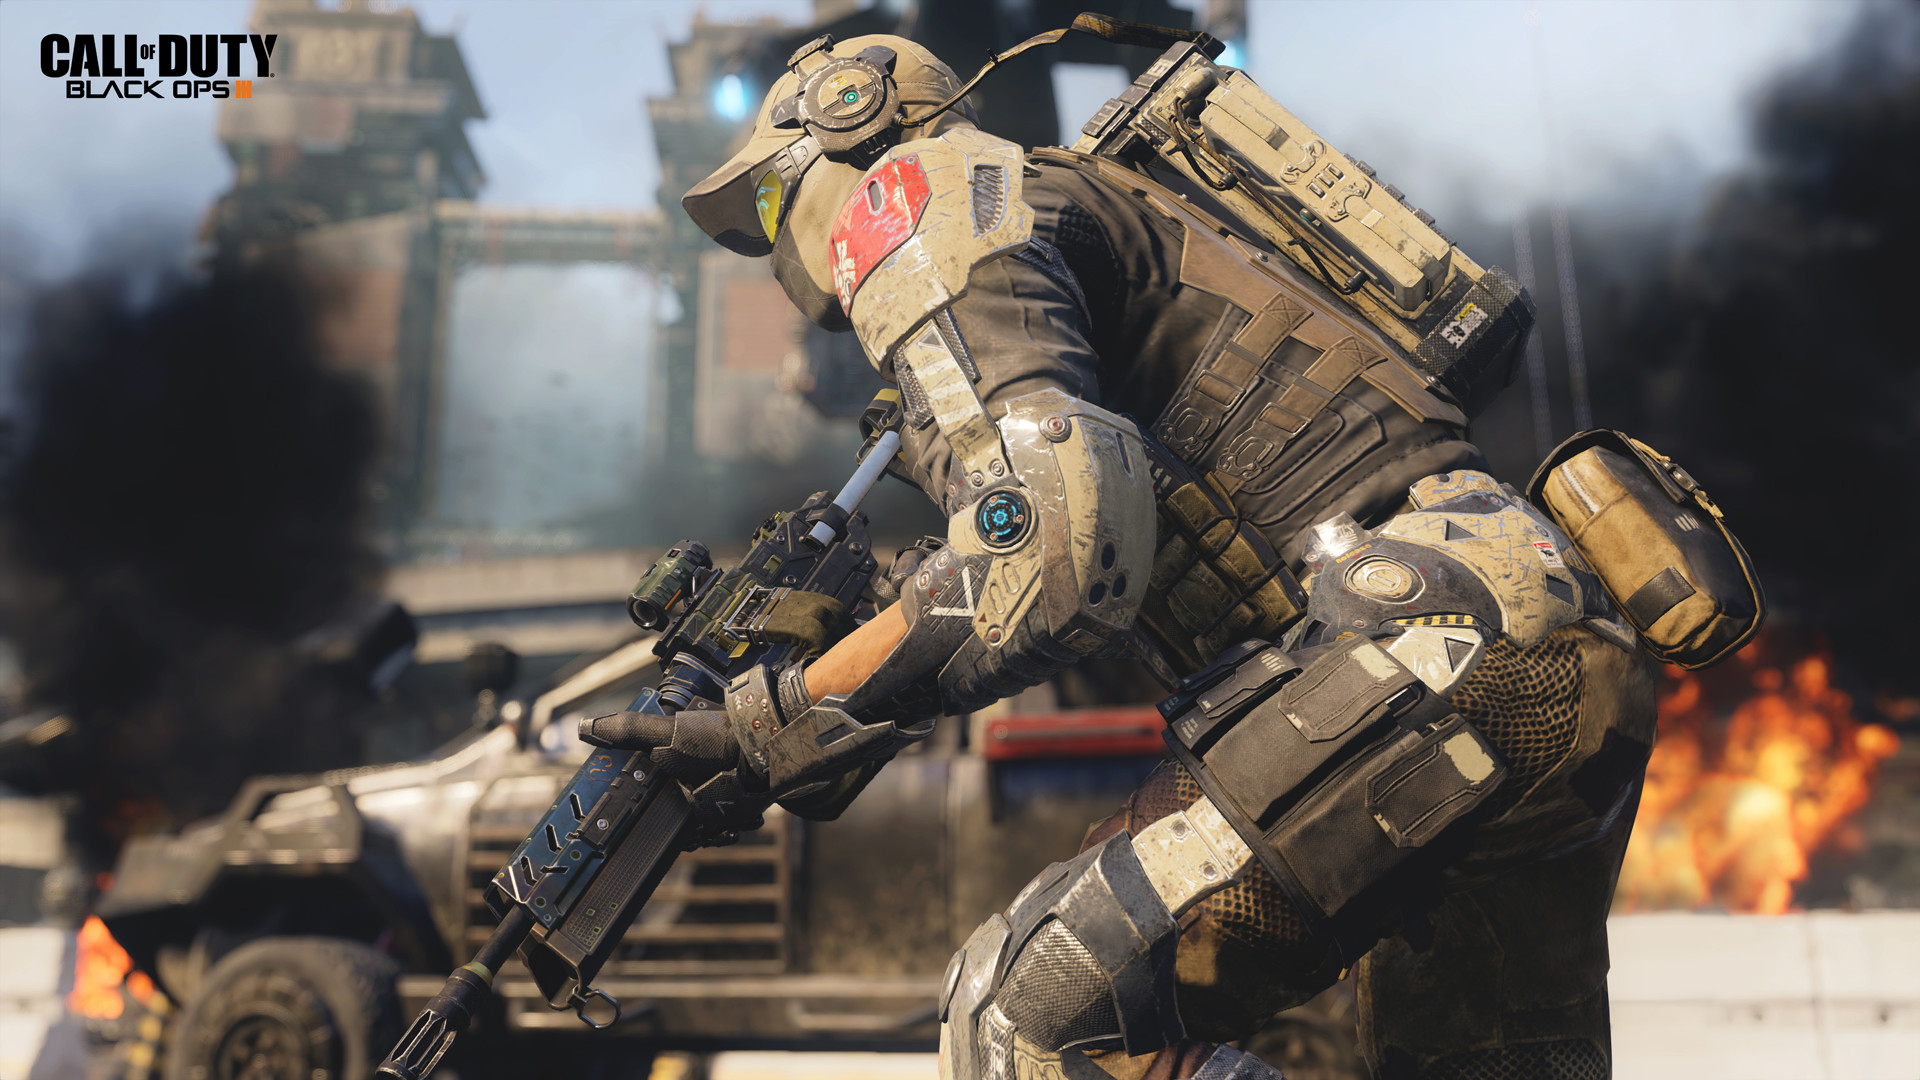 CALL OF DUTY BLACK OPS 3 Version Full Game Free Download